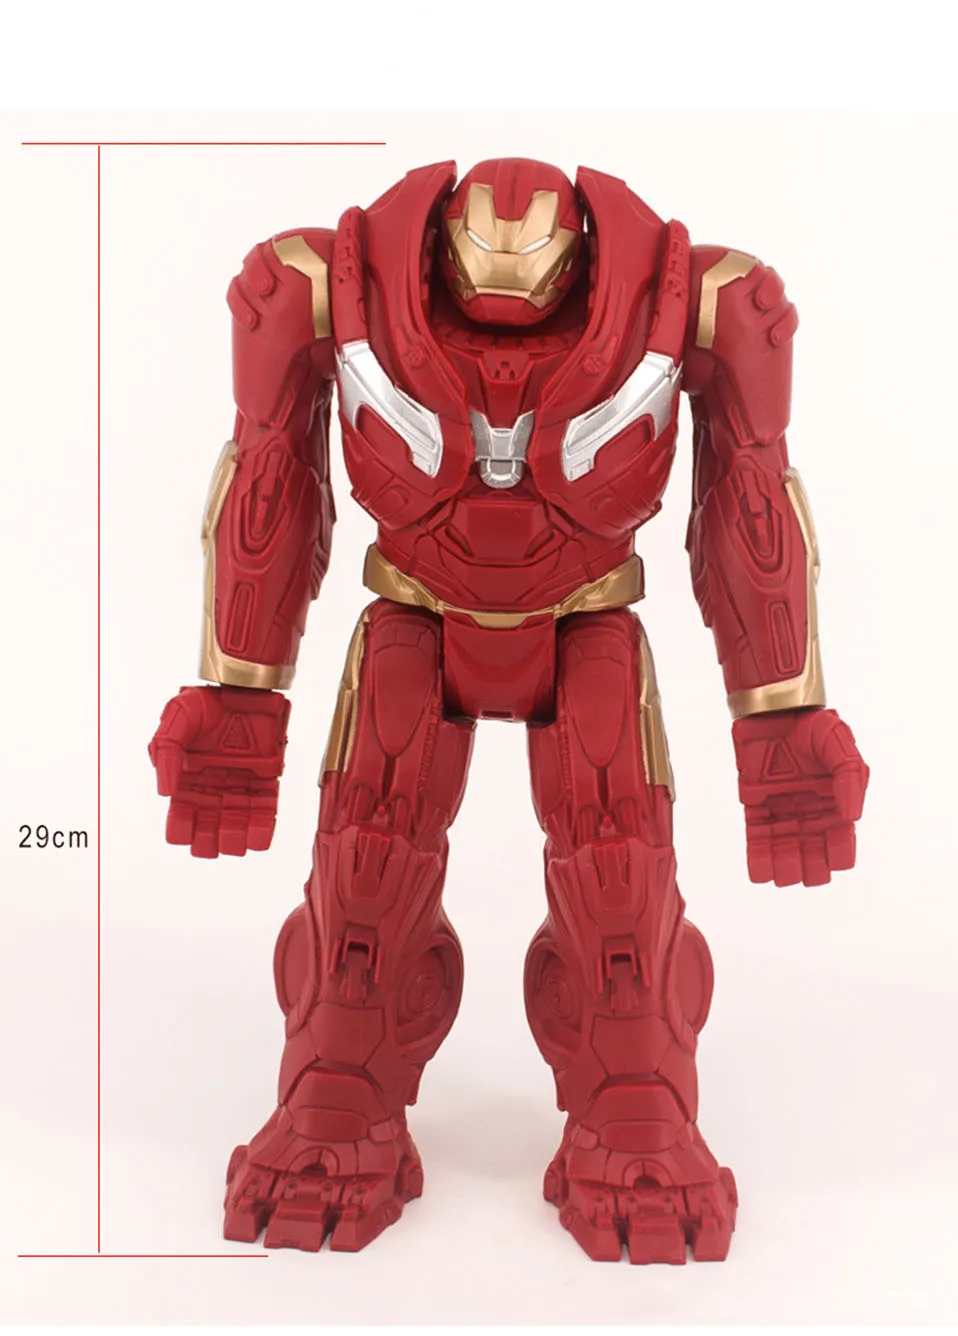 The Avengers Infinity War Hulkbuster The Hulk Thanos Captain America Iron Man PVC Action Figure Model Toy Christmas Gifts